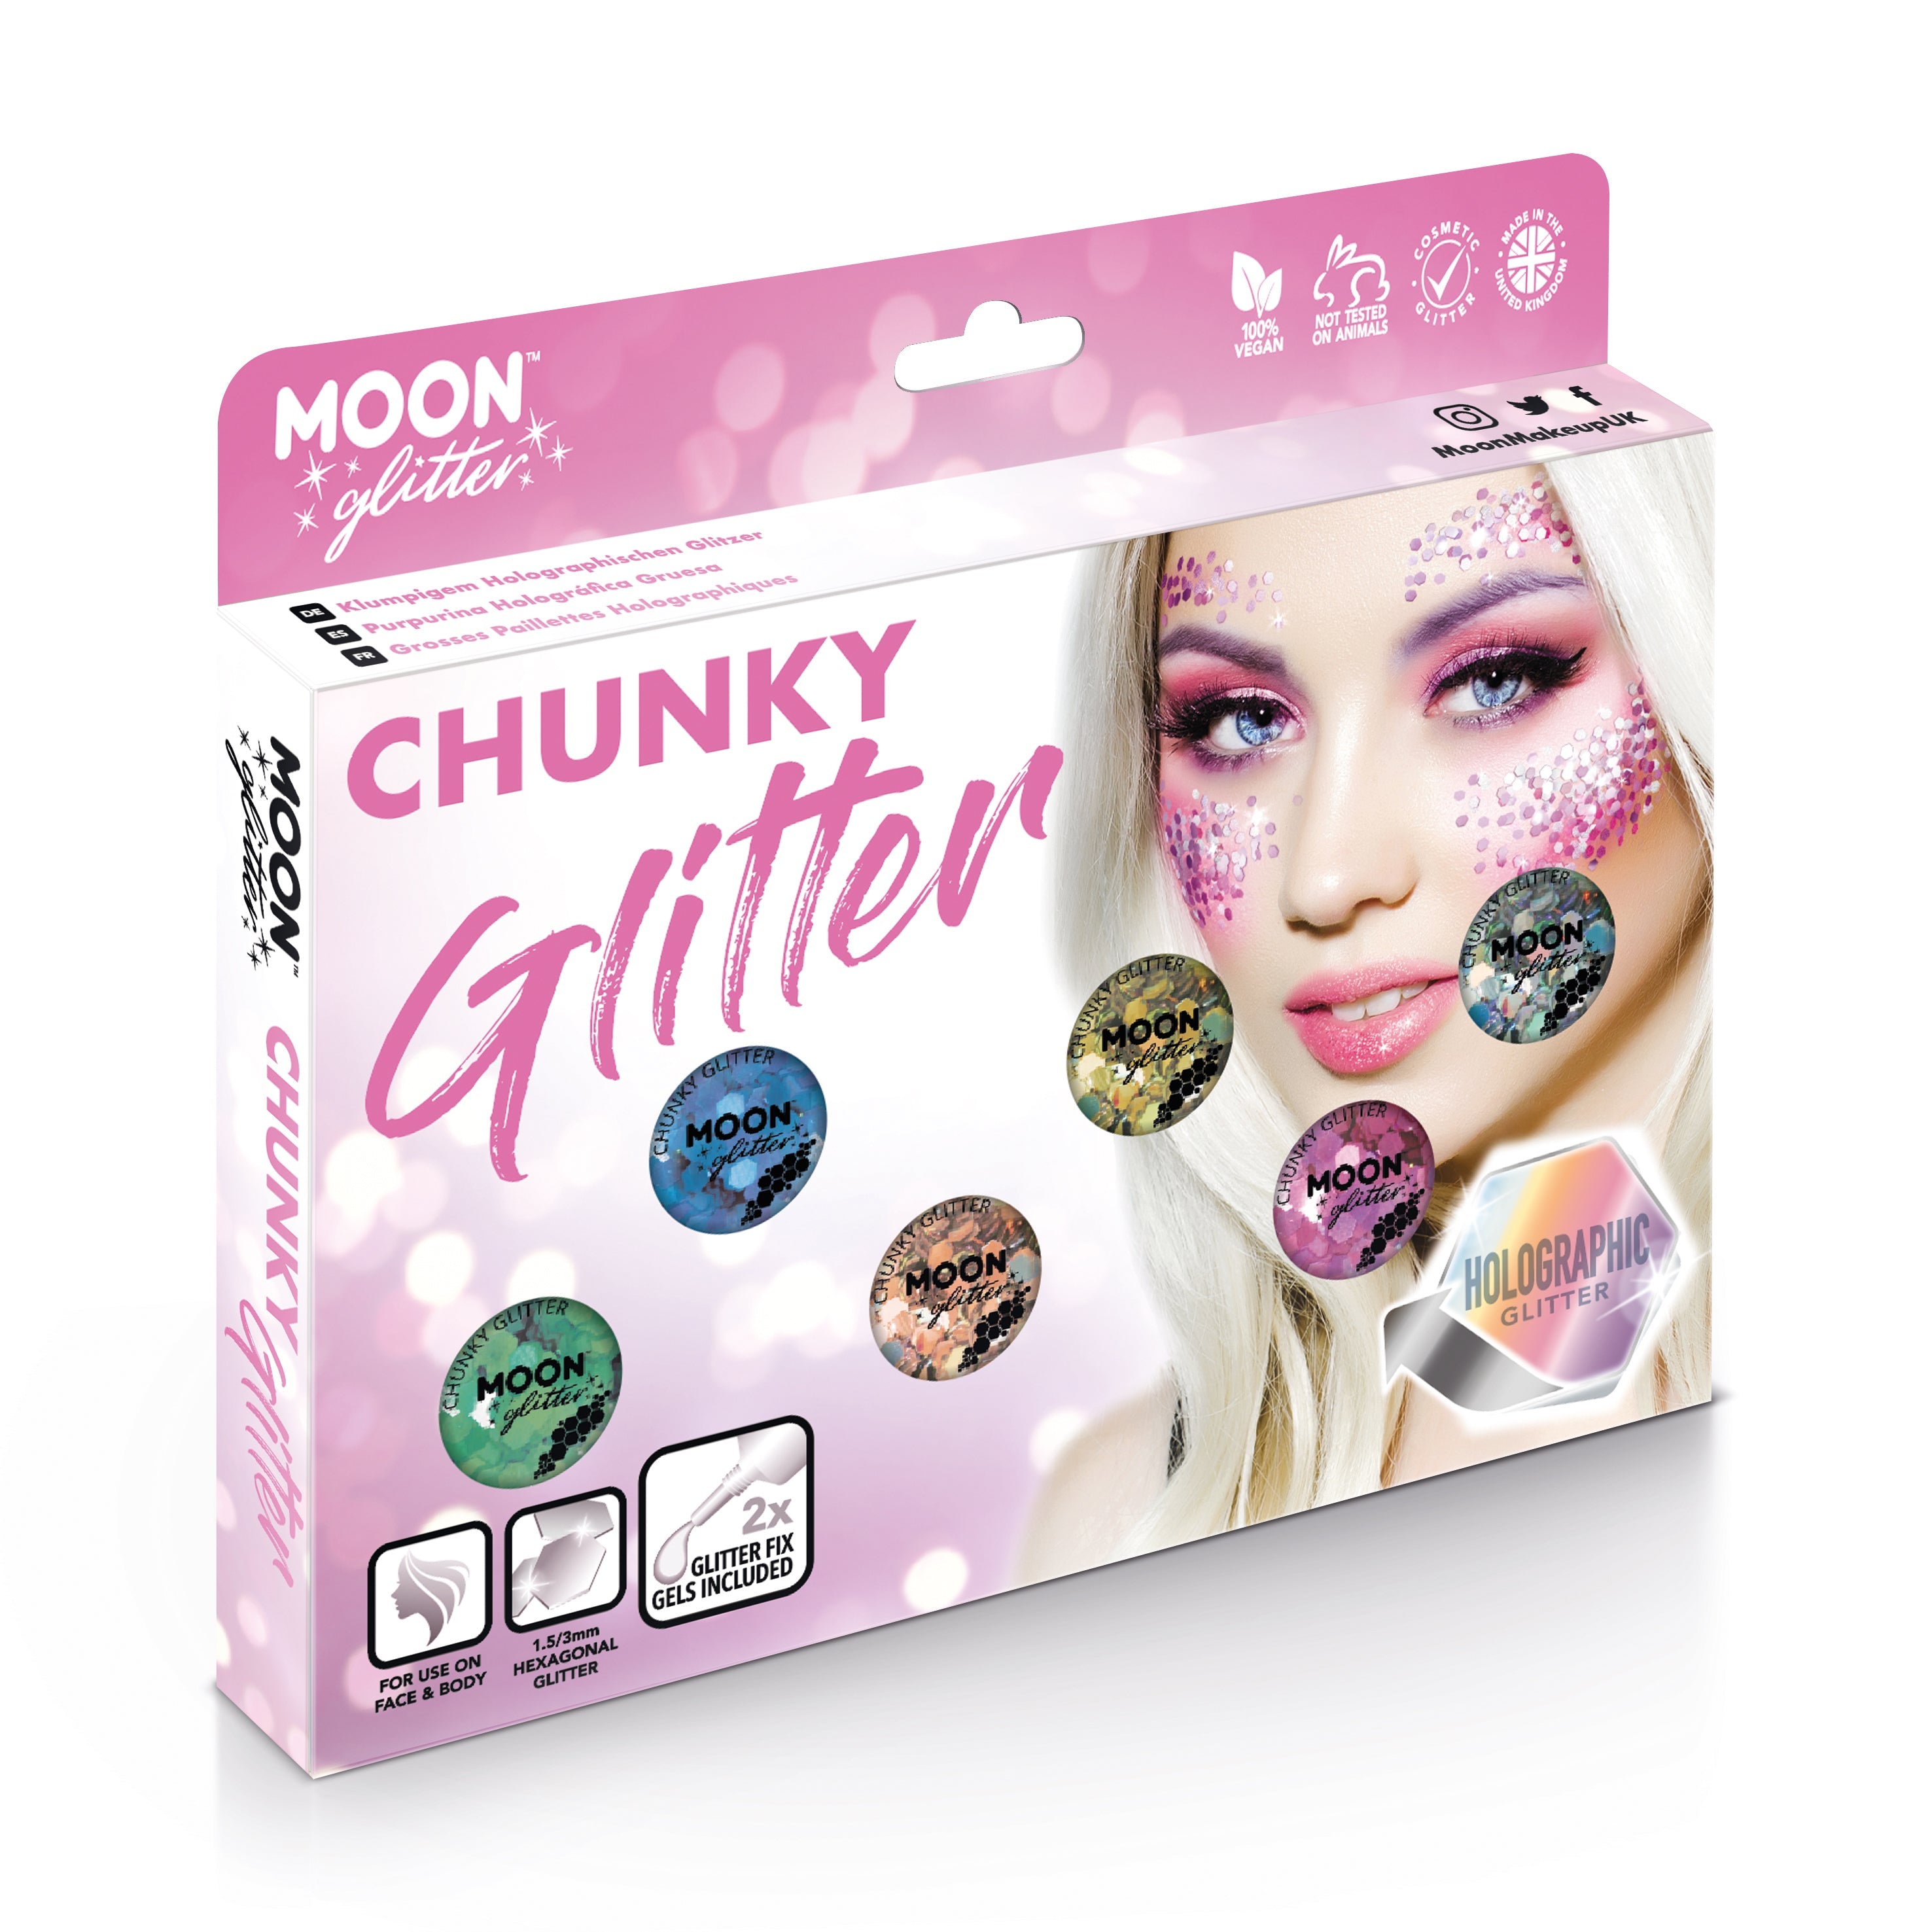 Holographic Chunky Face & Body Glitter  Boxset - 6 pots, 2 fix gel, brush. Cosmetically certified, FDA & Health Canada compliant, cruelty free and vegan.